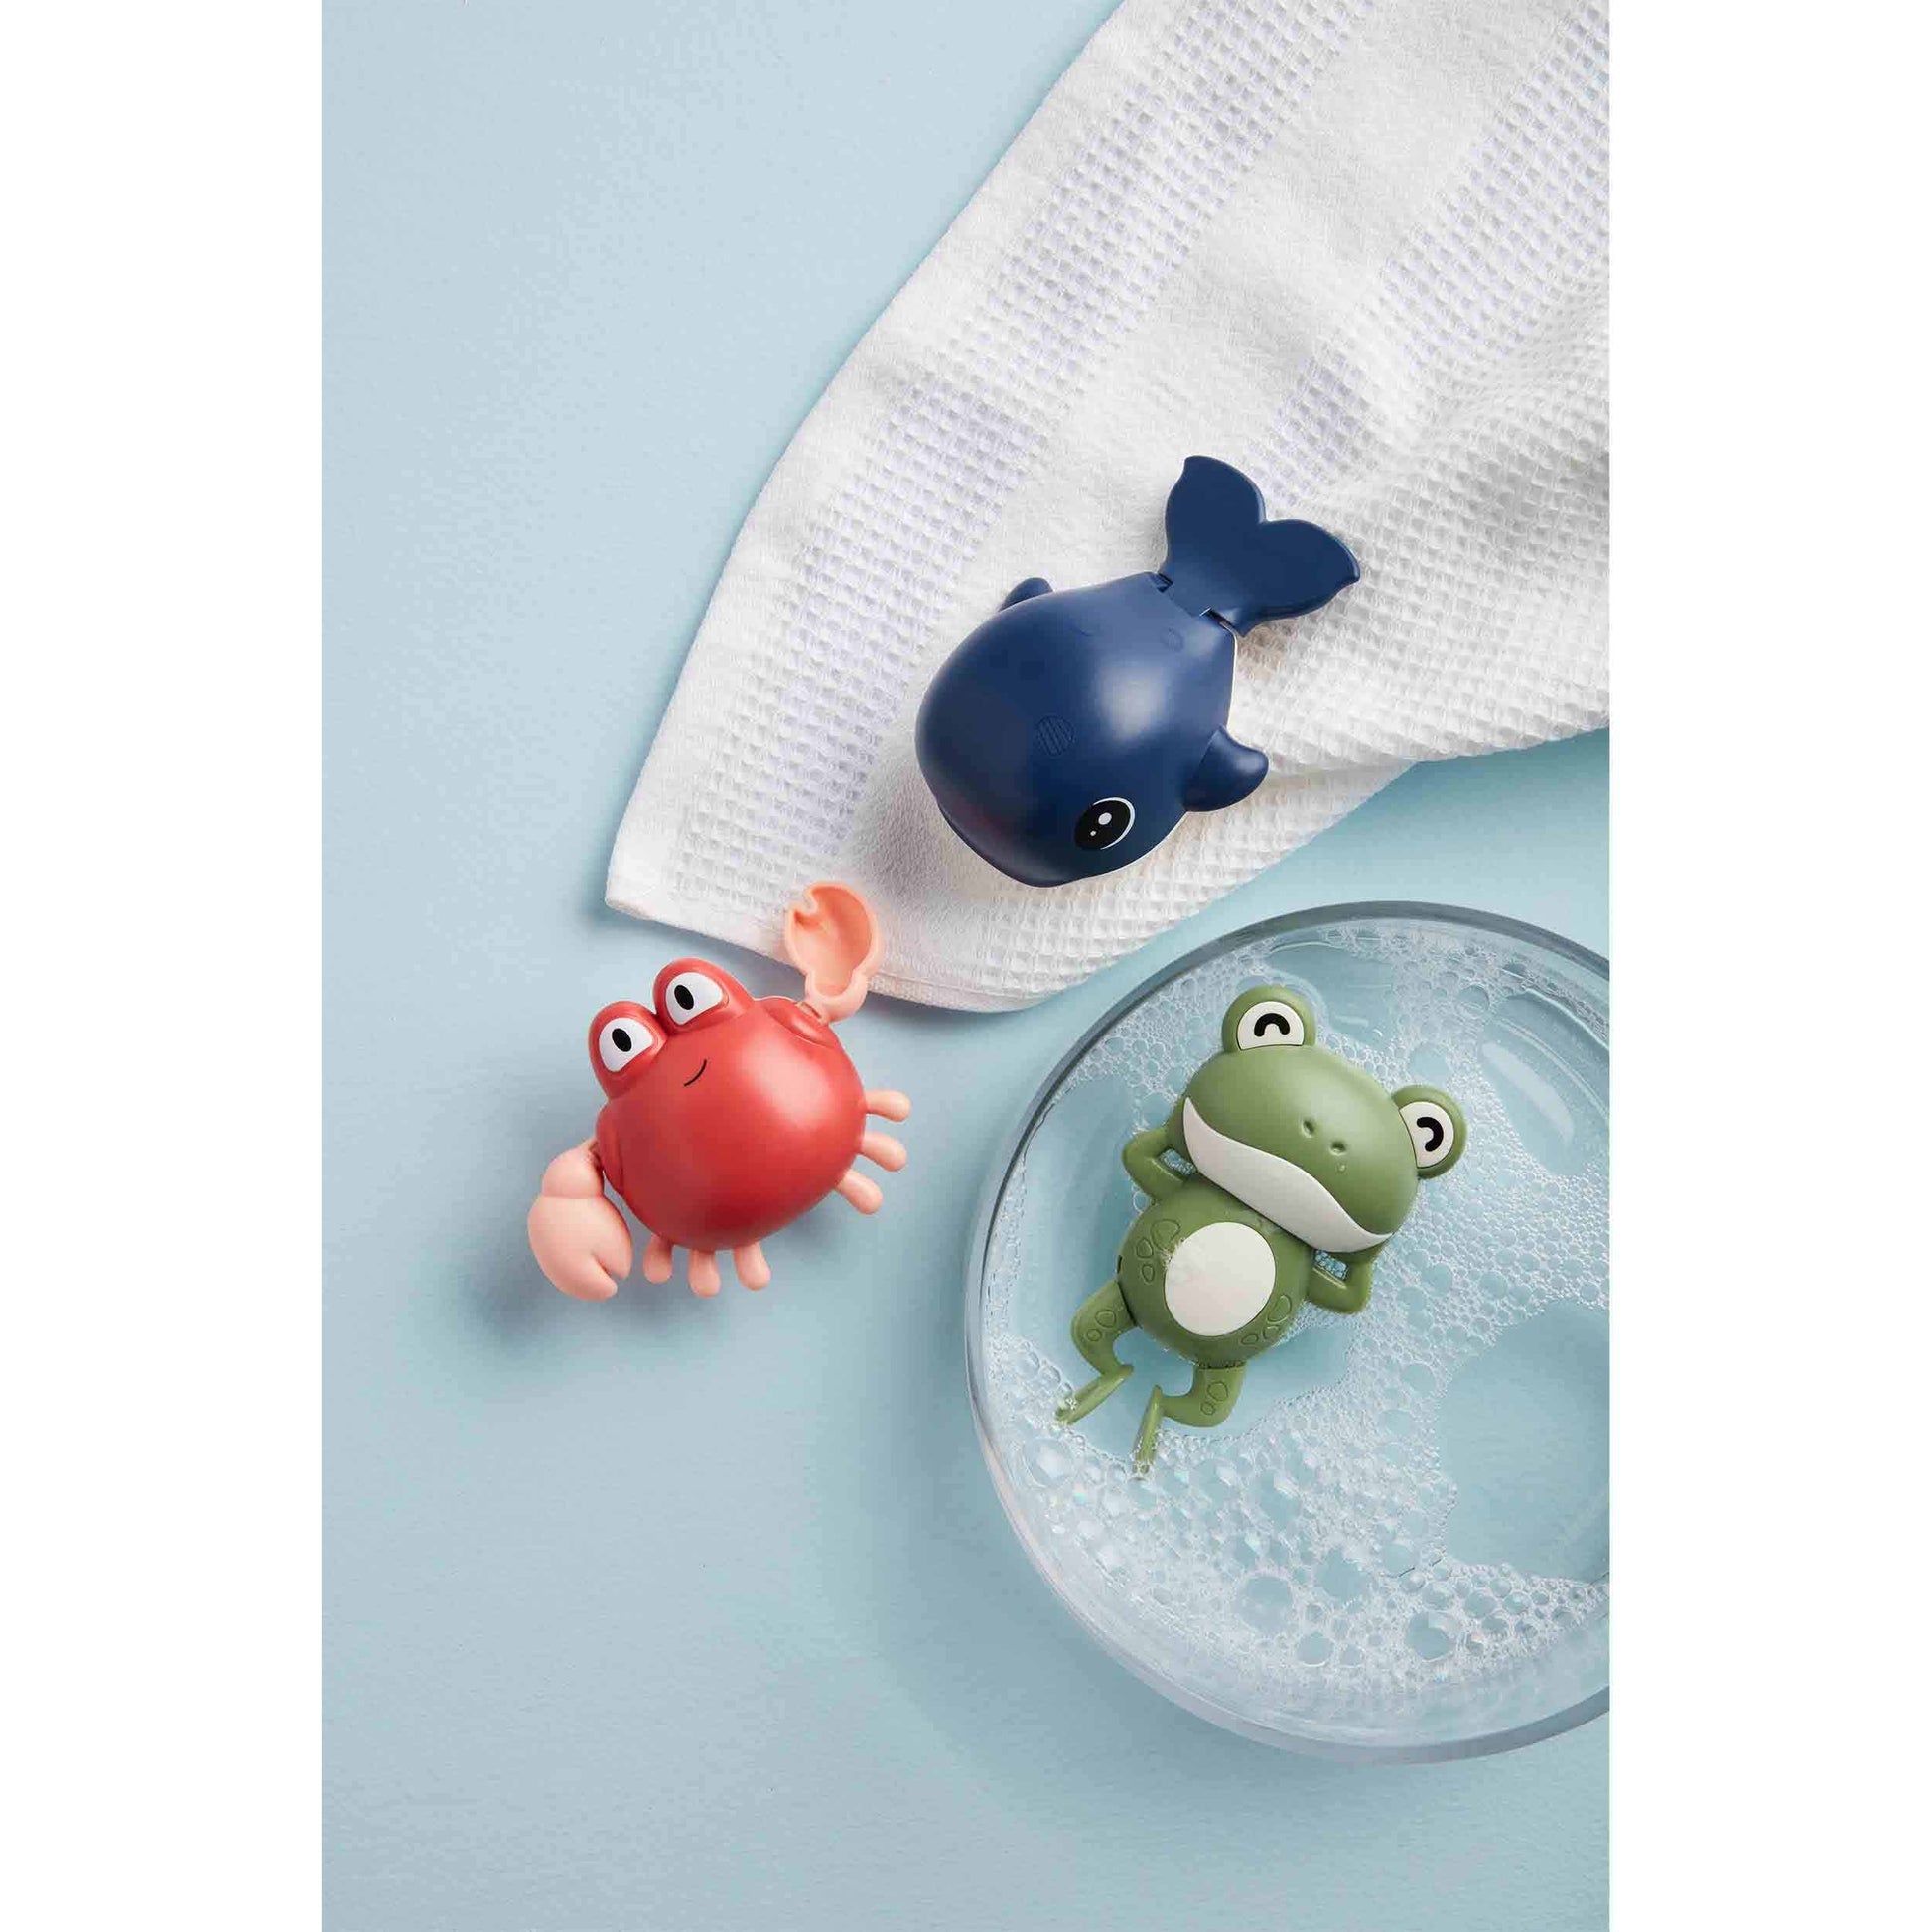 3 wind-up toys on a blue background, frog is in a dish of water, crab and whale are on a white towel.